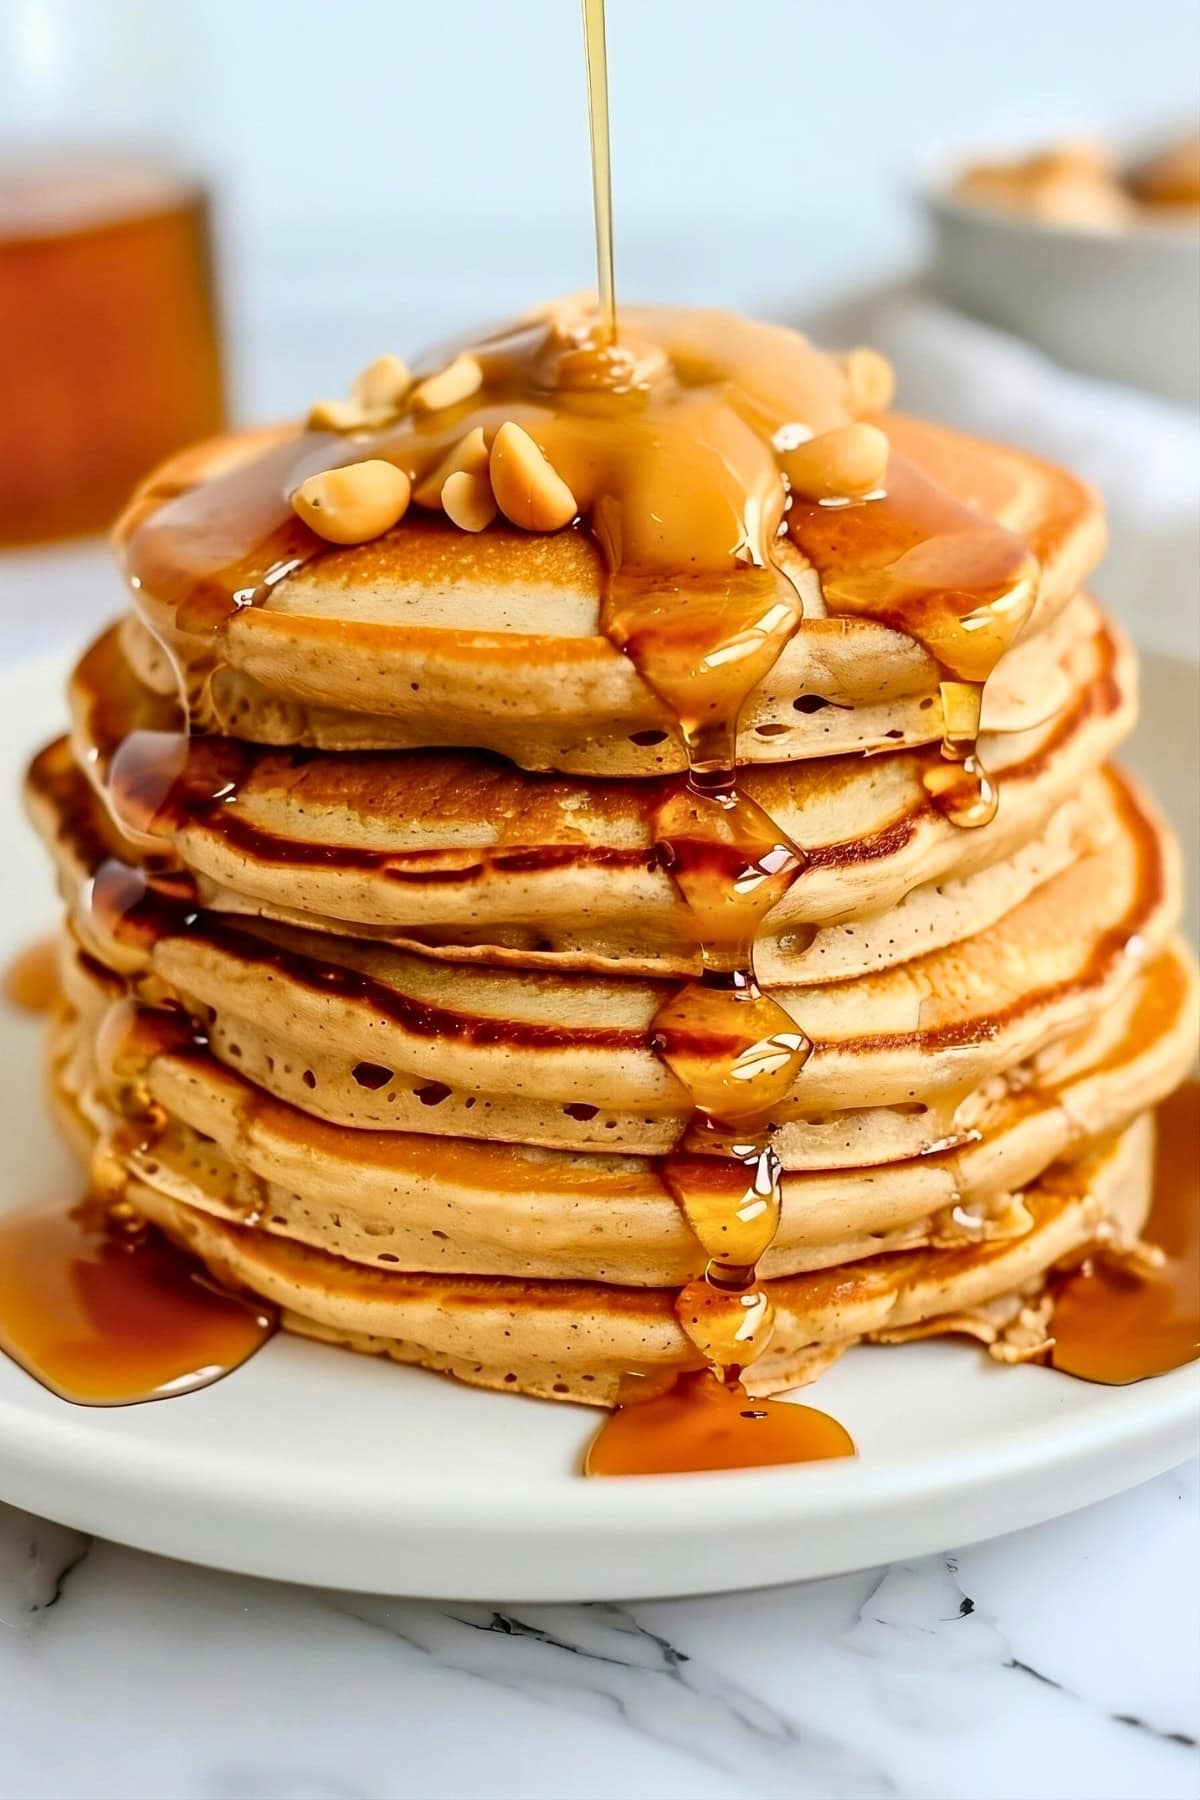 Peanut Butter Pancakes - Insanely Good